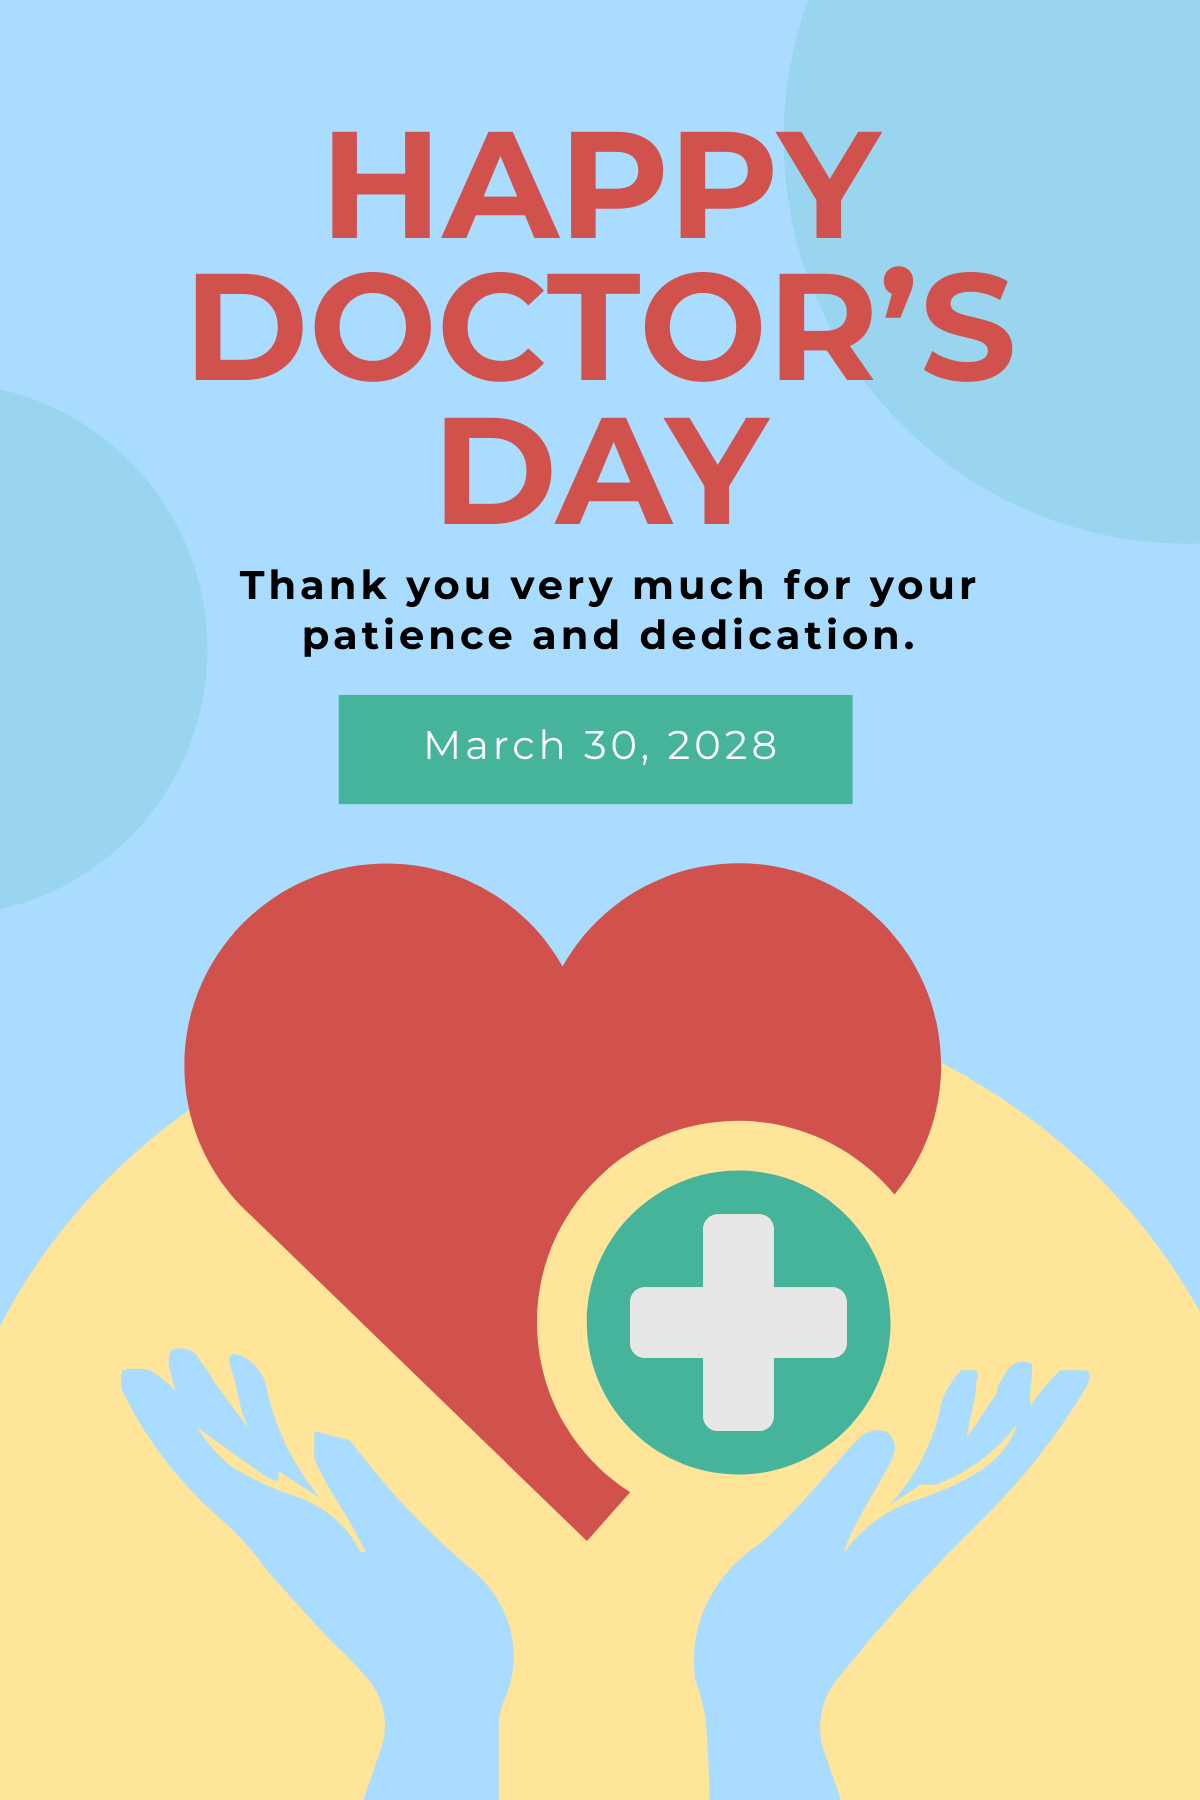 Doctors' Day Pinterest Pin Template